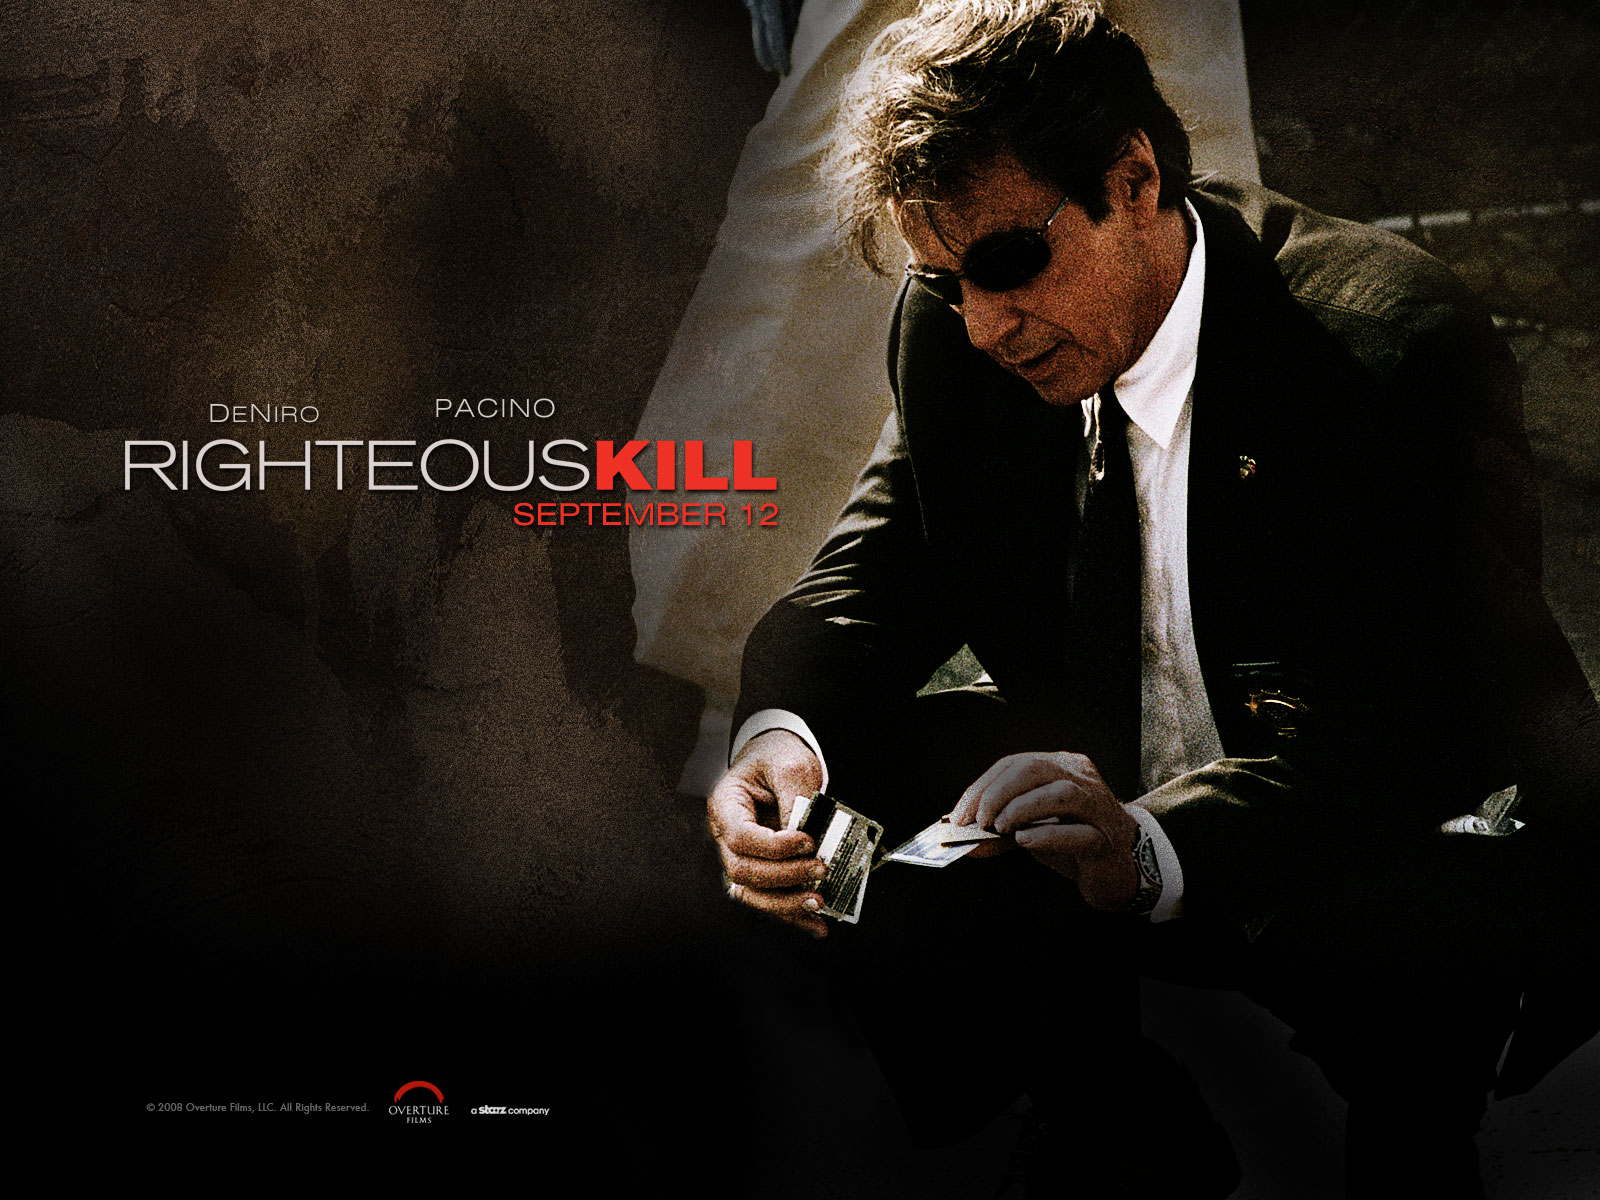 Download High quality Righteous Kill wallpaper / Movies / 1600x1200